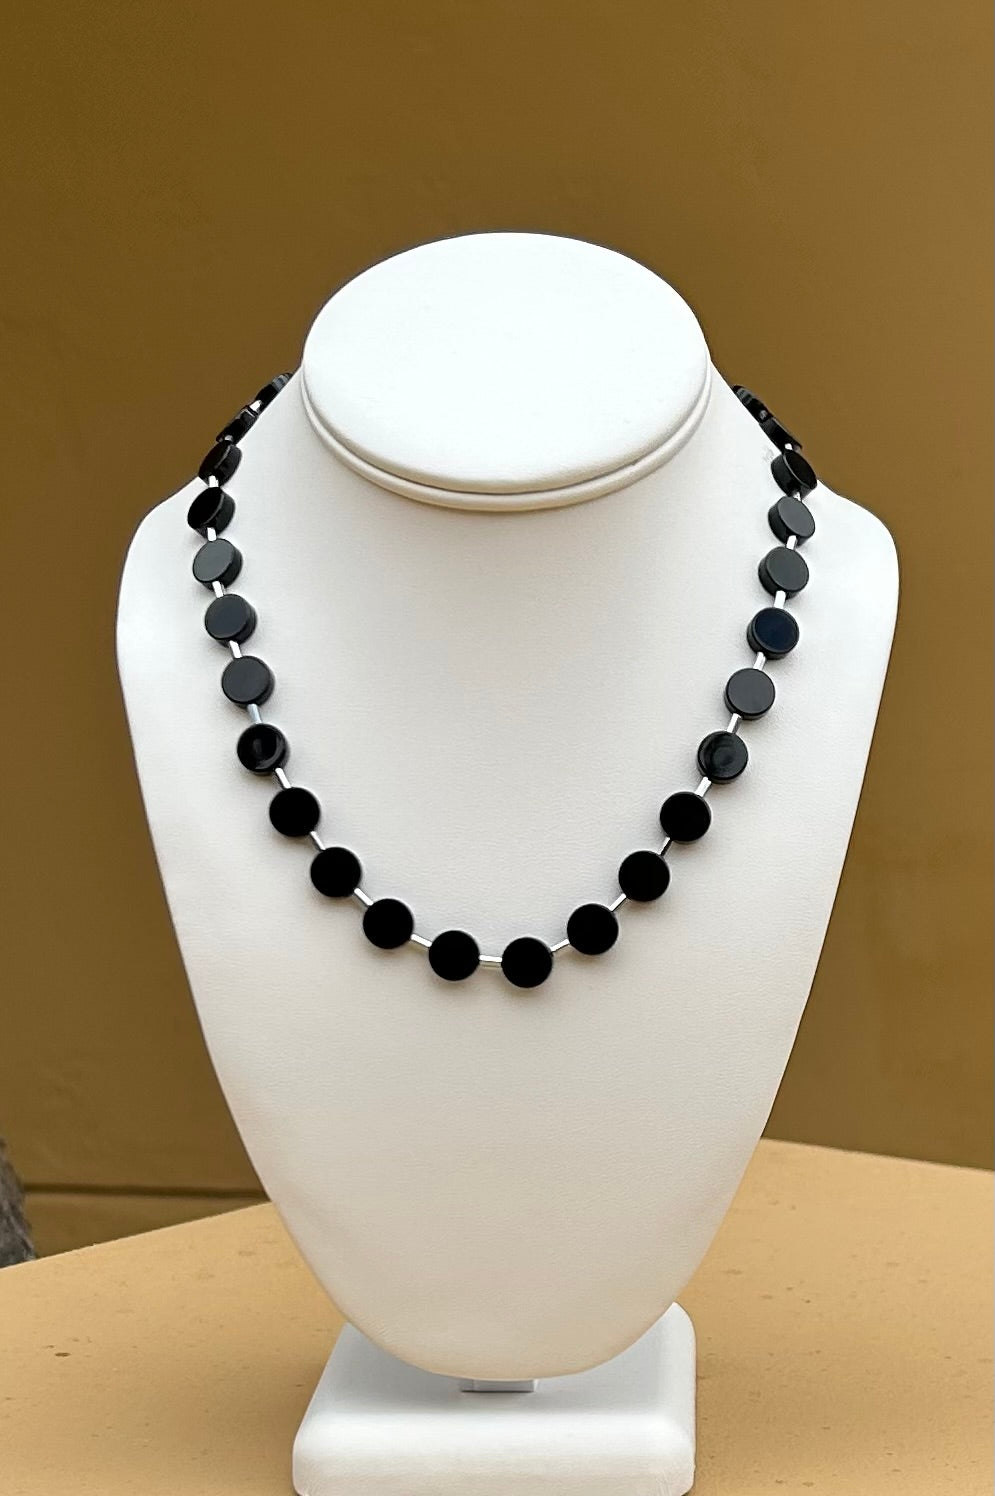 Necklace - Coin shaped only with silver hematite spacers